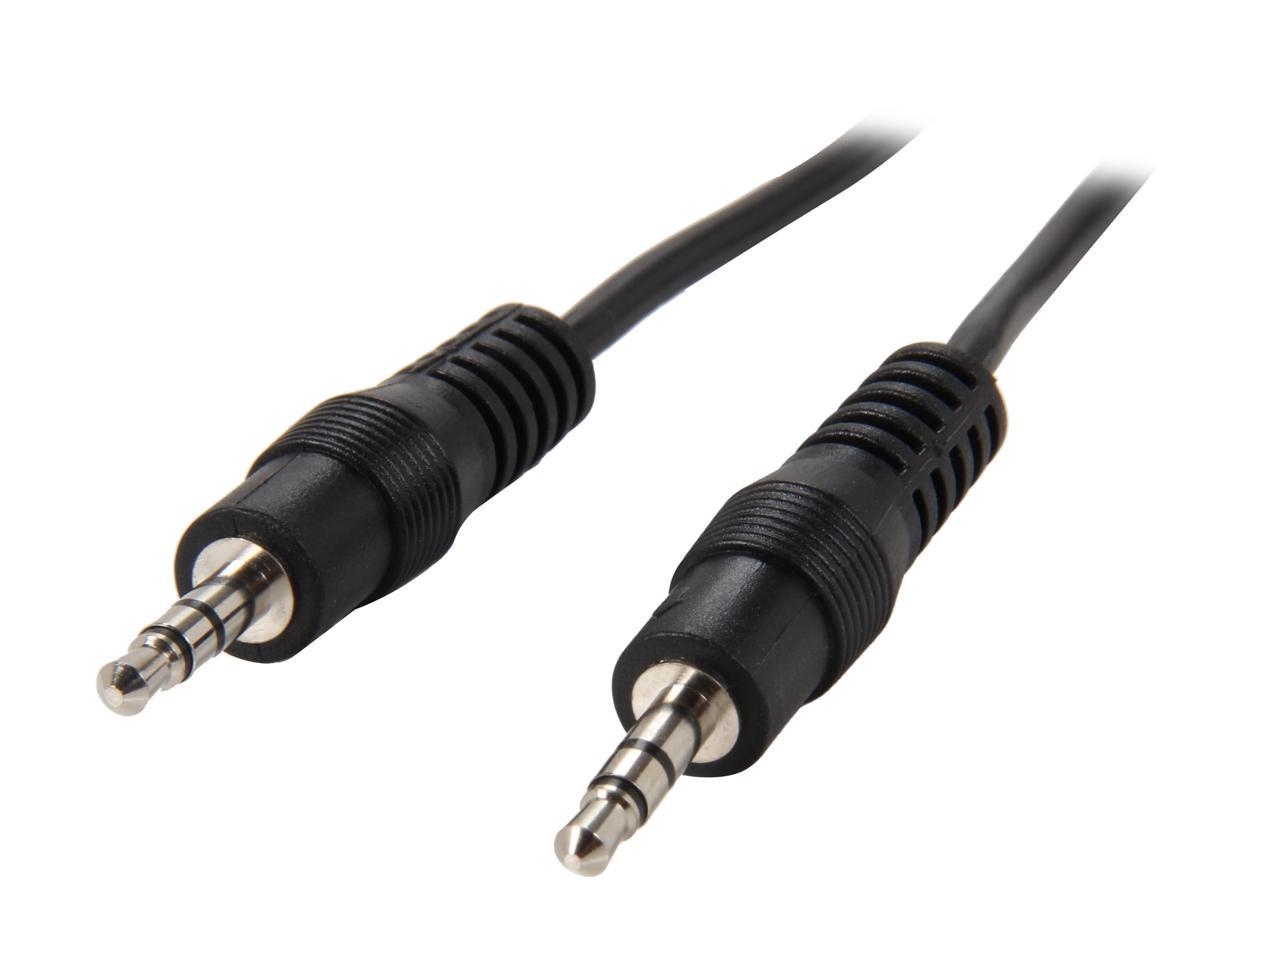 25 Feet Premium 3.5mm 1/8" Stereo Male Aux Plug to 2 RCA Male Audio Cable Cord 